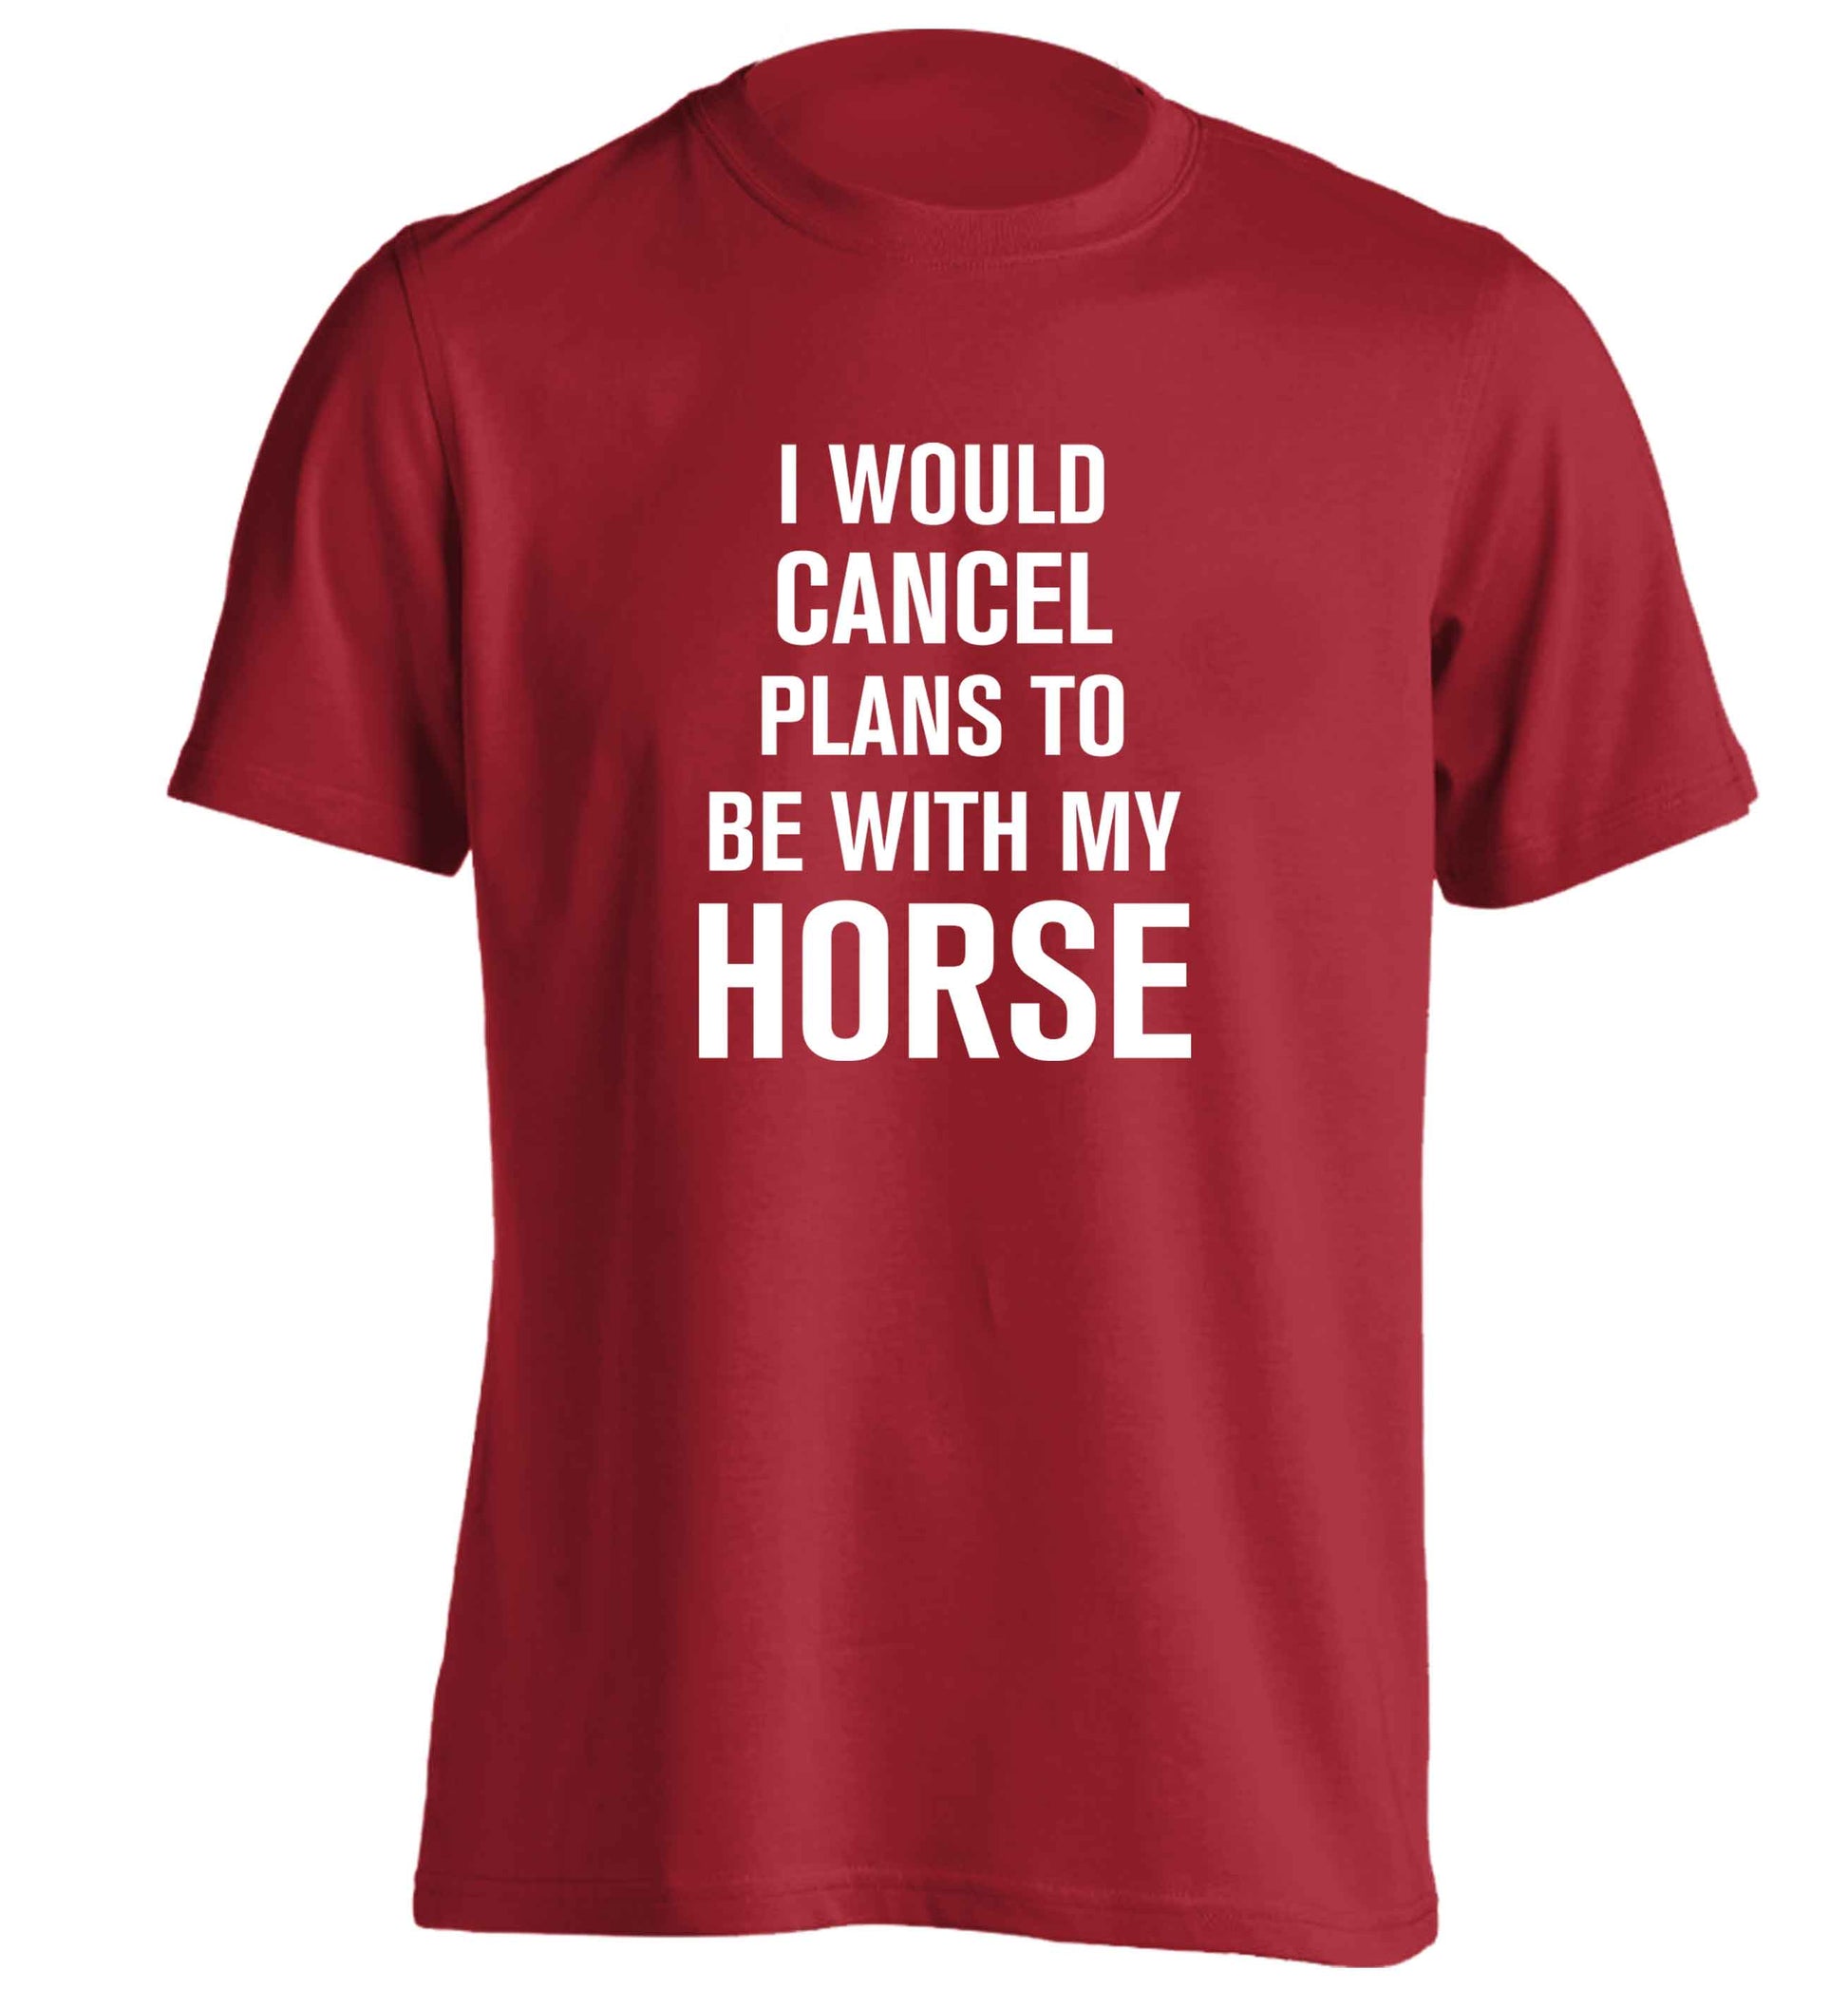 I will cancel plans to be with my horse adults unisex red Tshirt 2XL